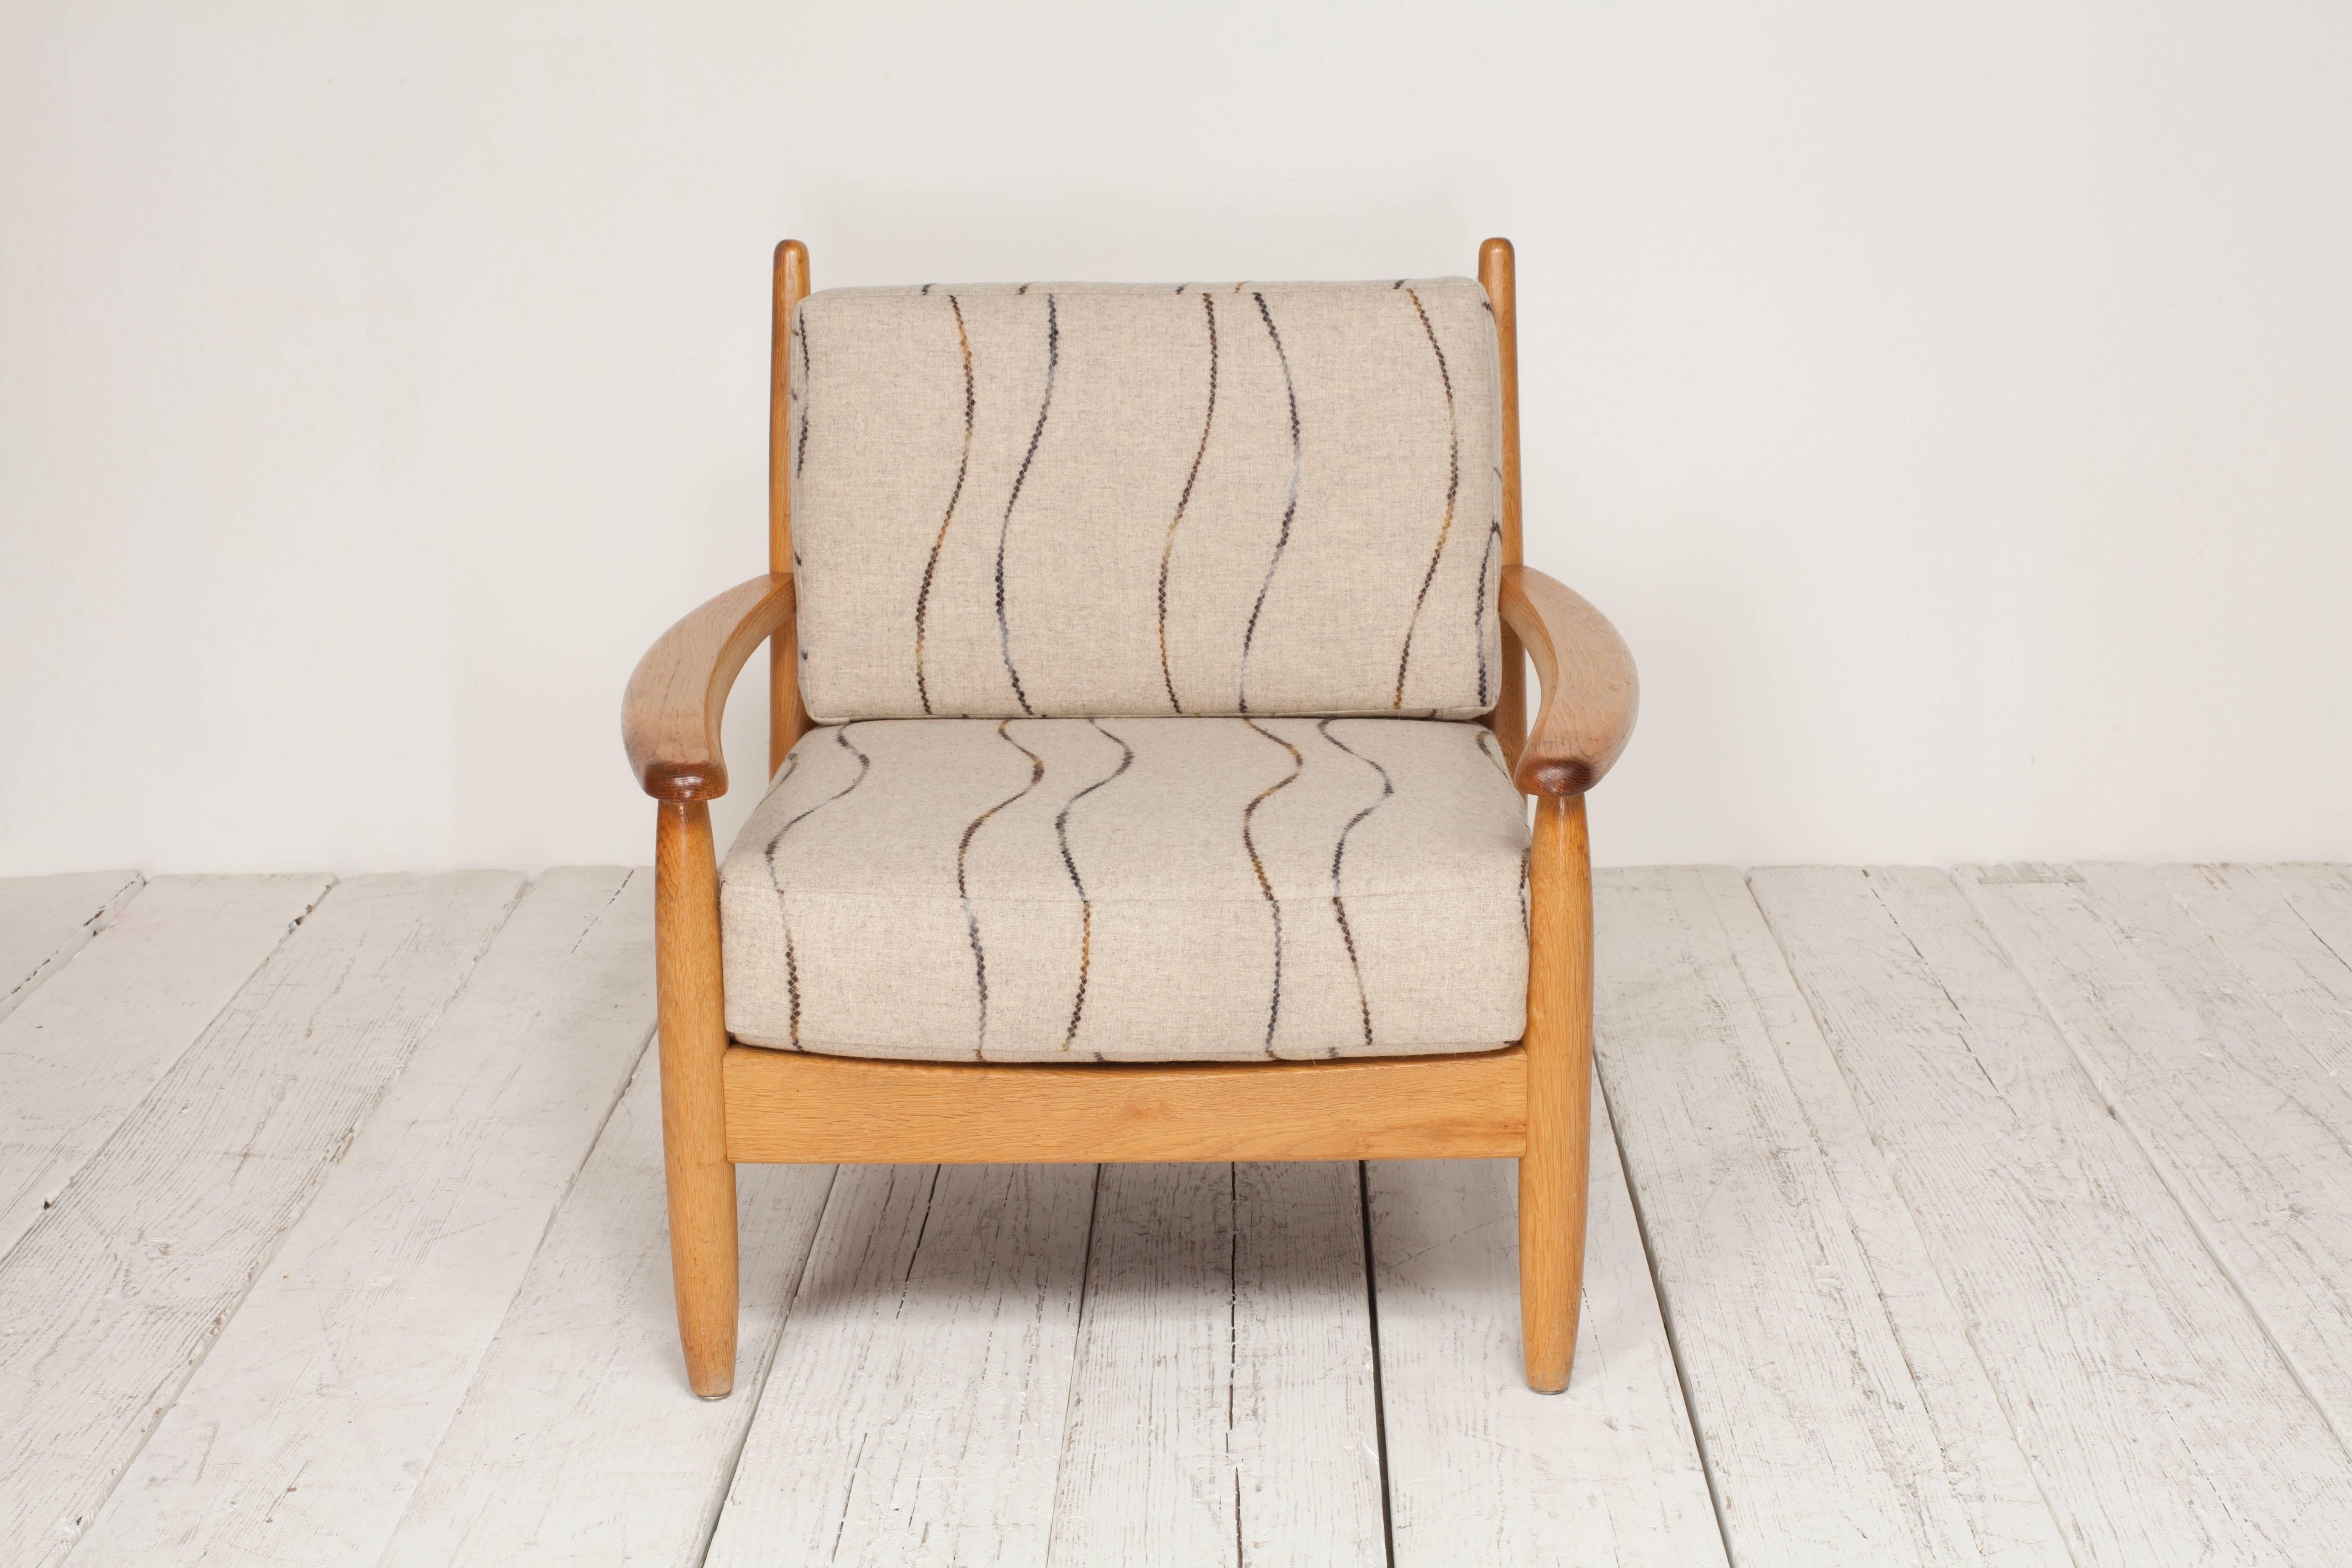 Midcentury Oak Spindle Chair Newly Upholstered in in Grey Wool Fabric 7